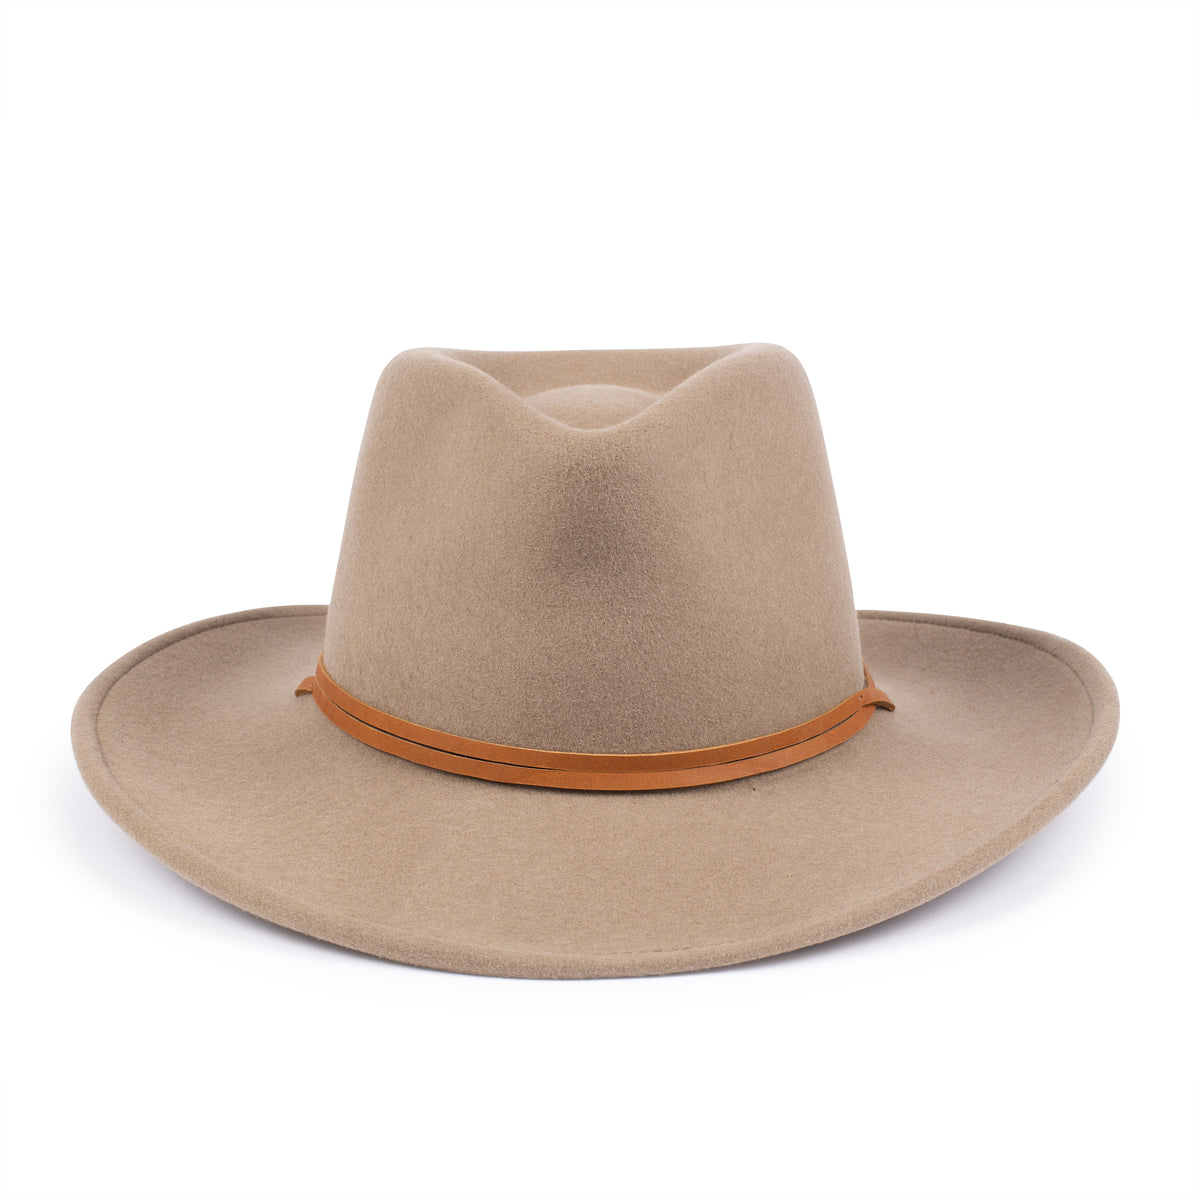 Lasso Outdoor Crushable Sage Green  Stetson, Crushable hat, Stetson hat